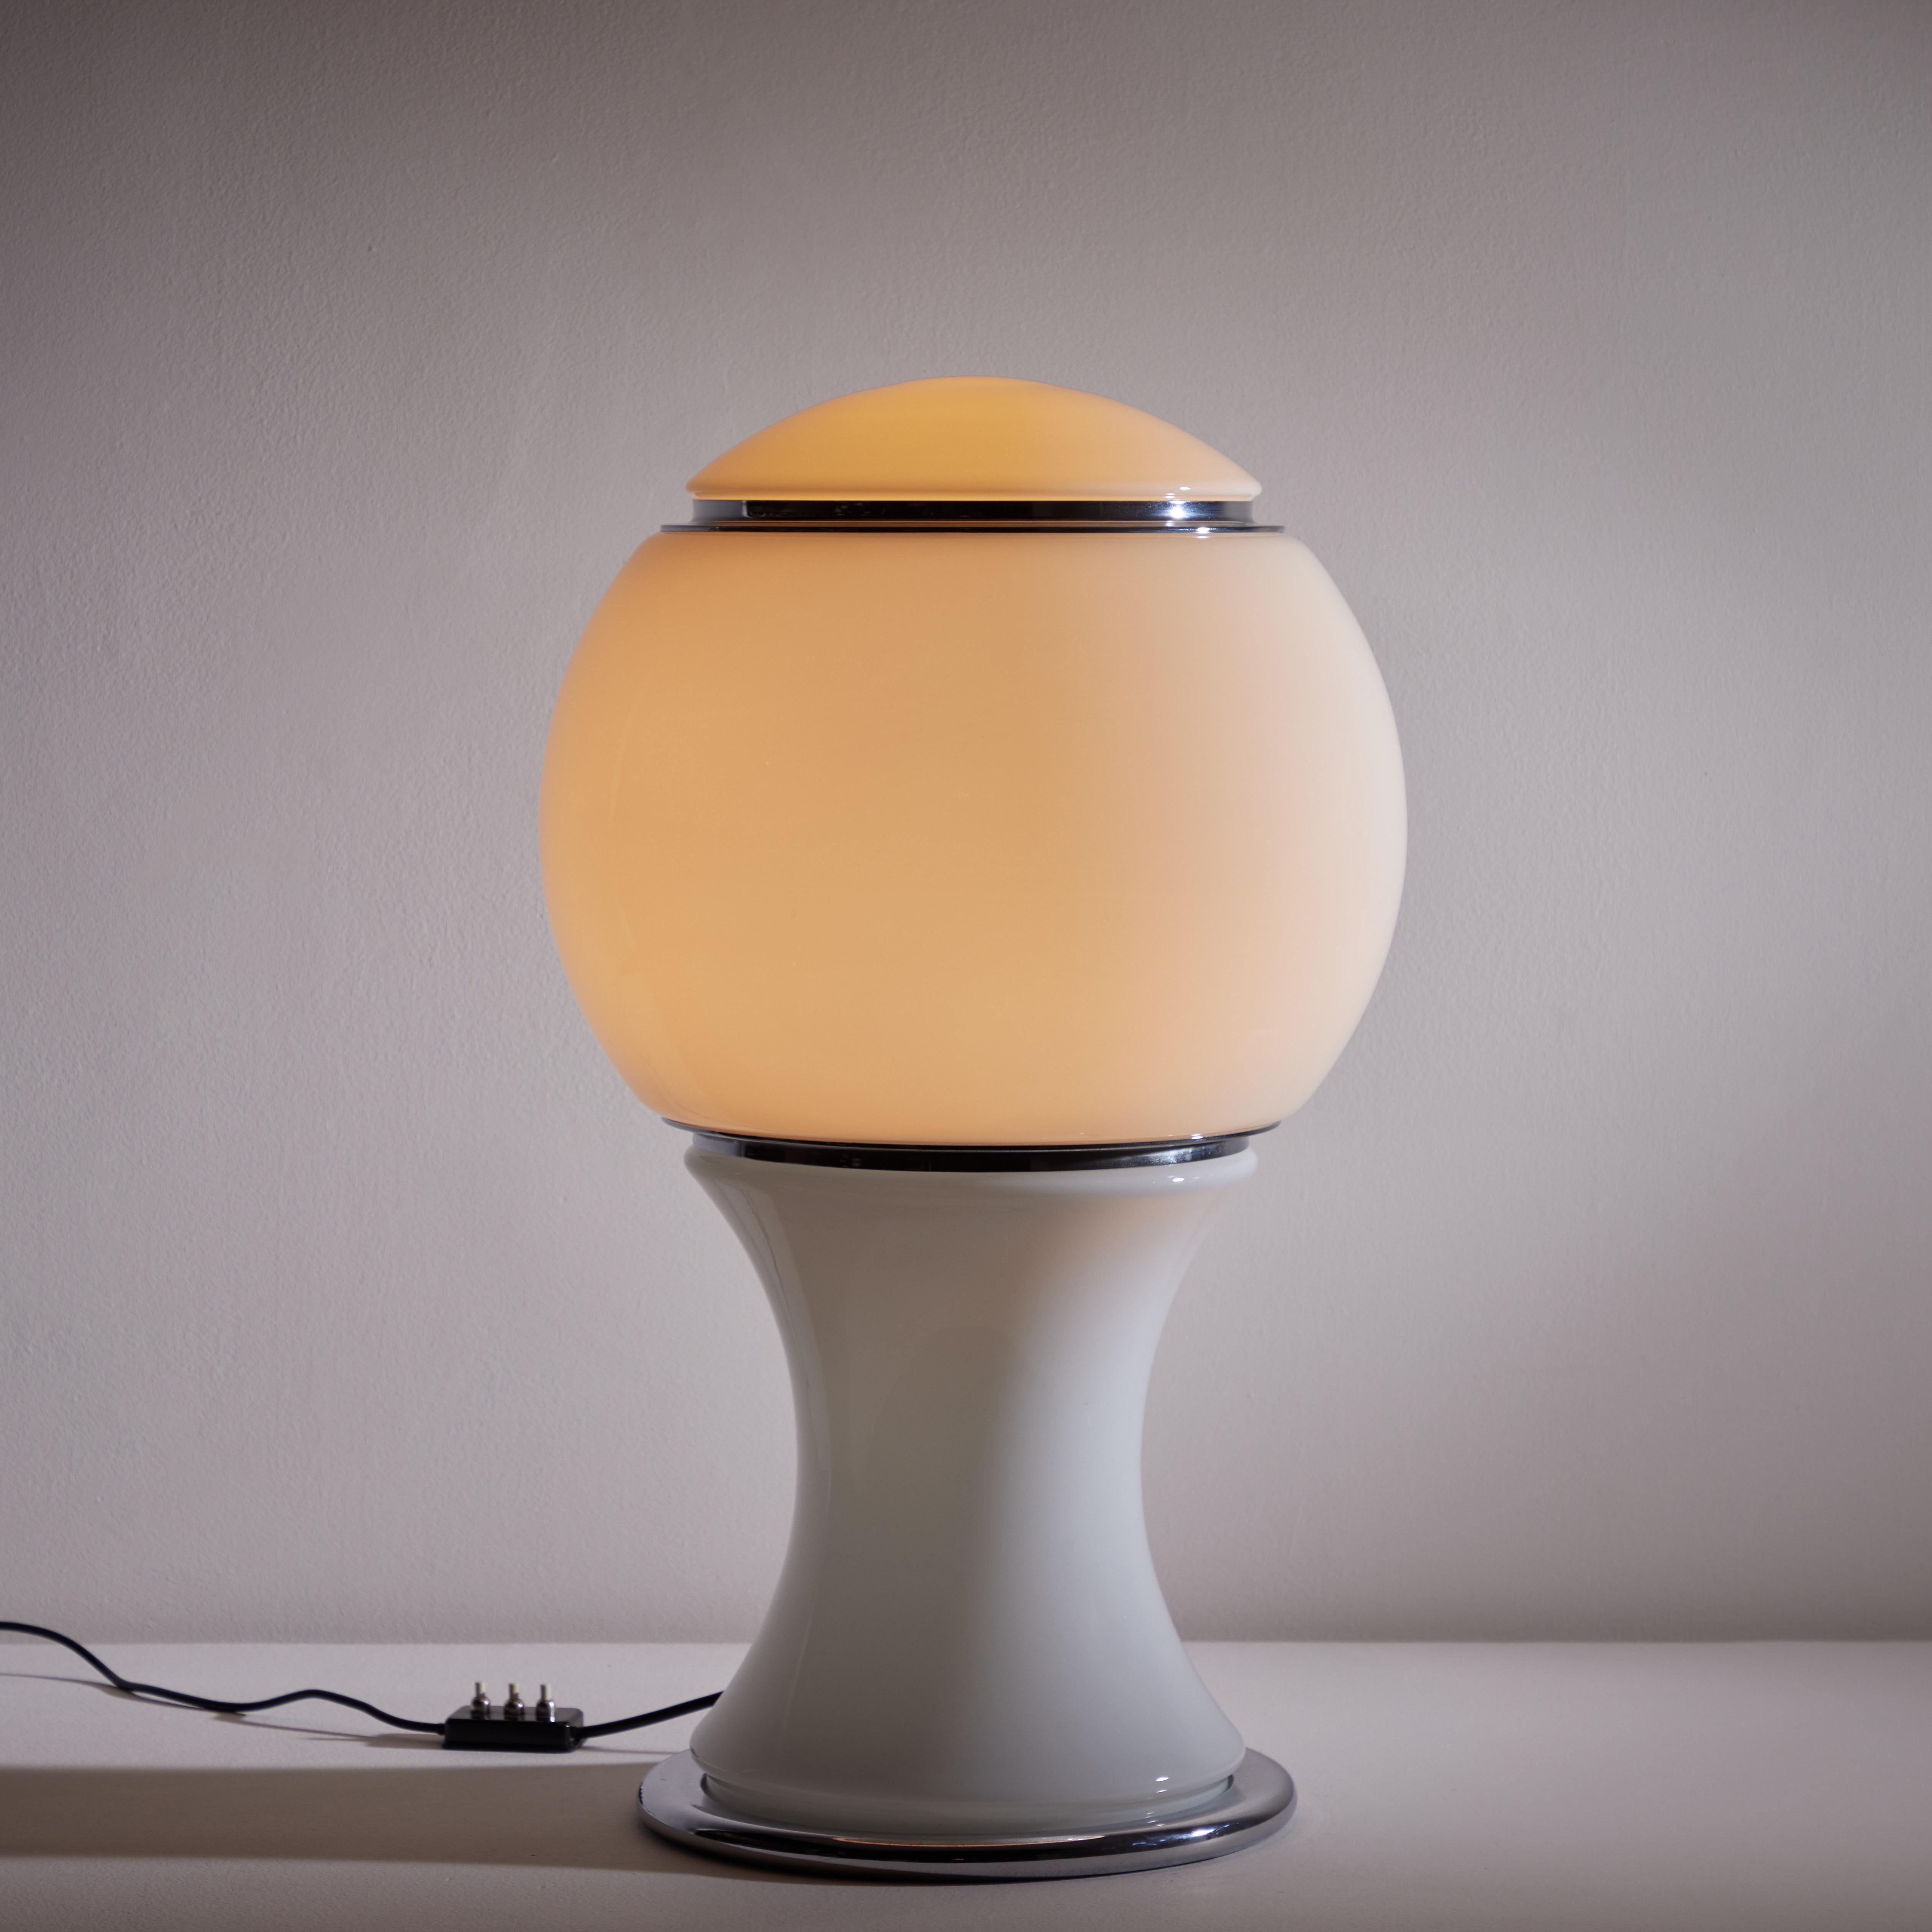 Large 'Mongolfiera' table lamp by Gianni Celada for Fontana Arte. Designed and manufactured in 1966 approximately. Shade is composed of three sections of opaline glass with chrome detailing. Each glass section has its own illumination. Cord switch